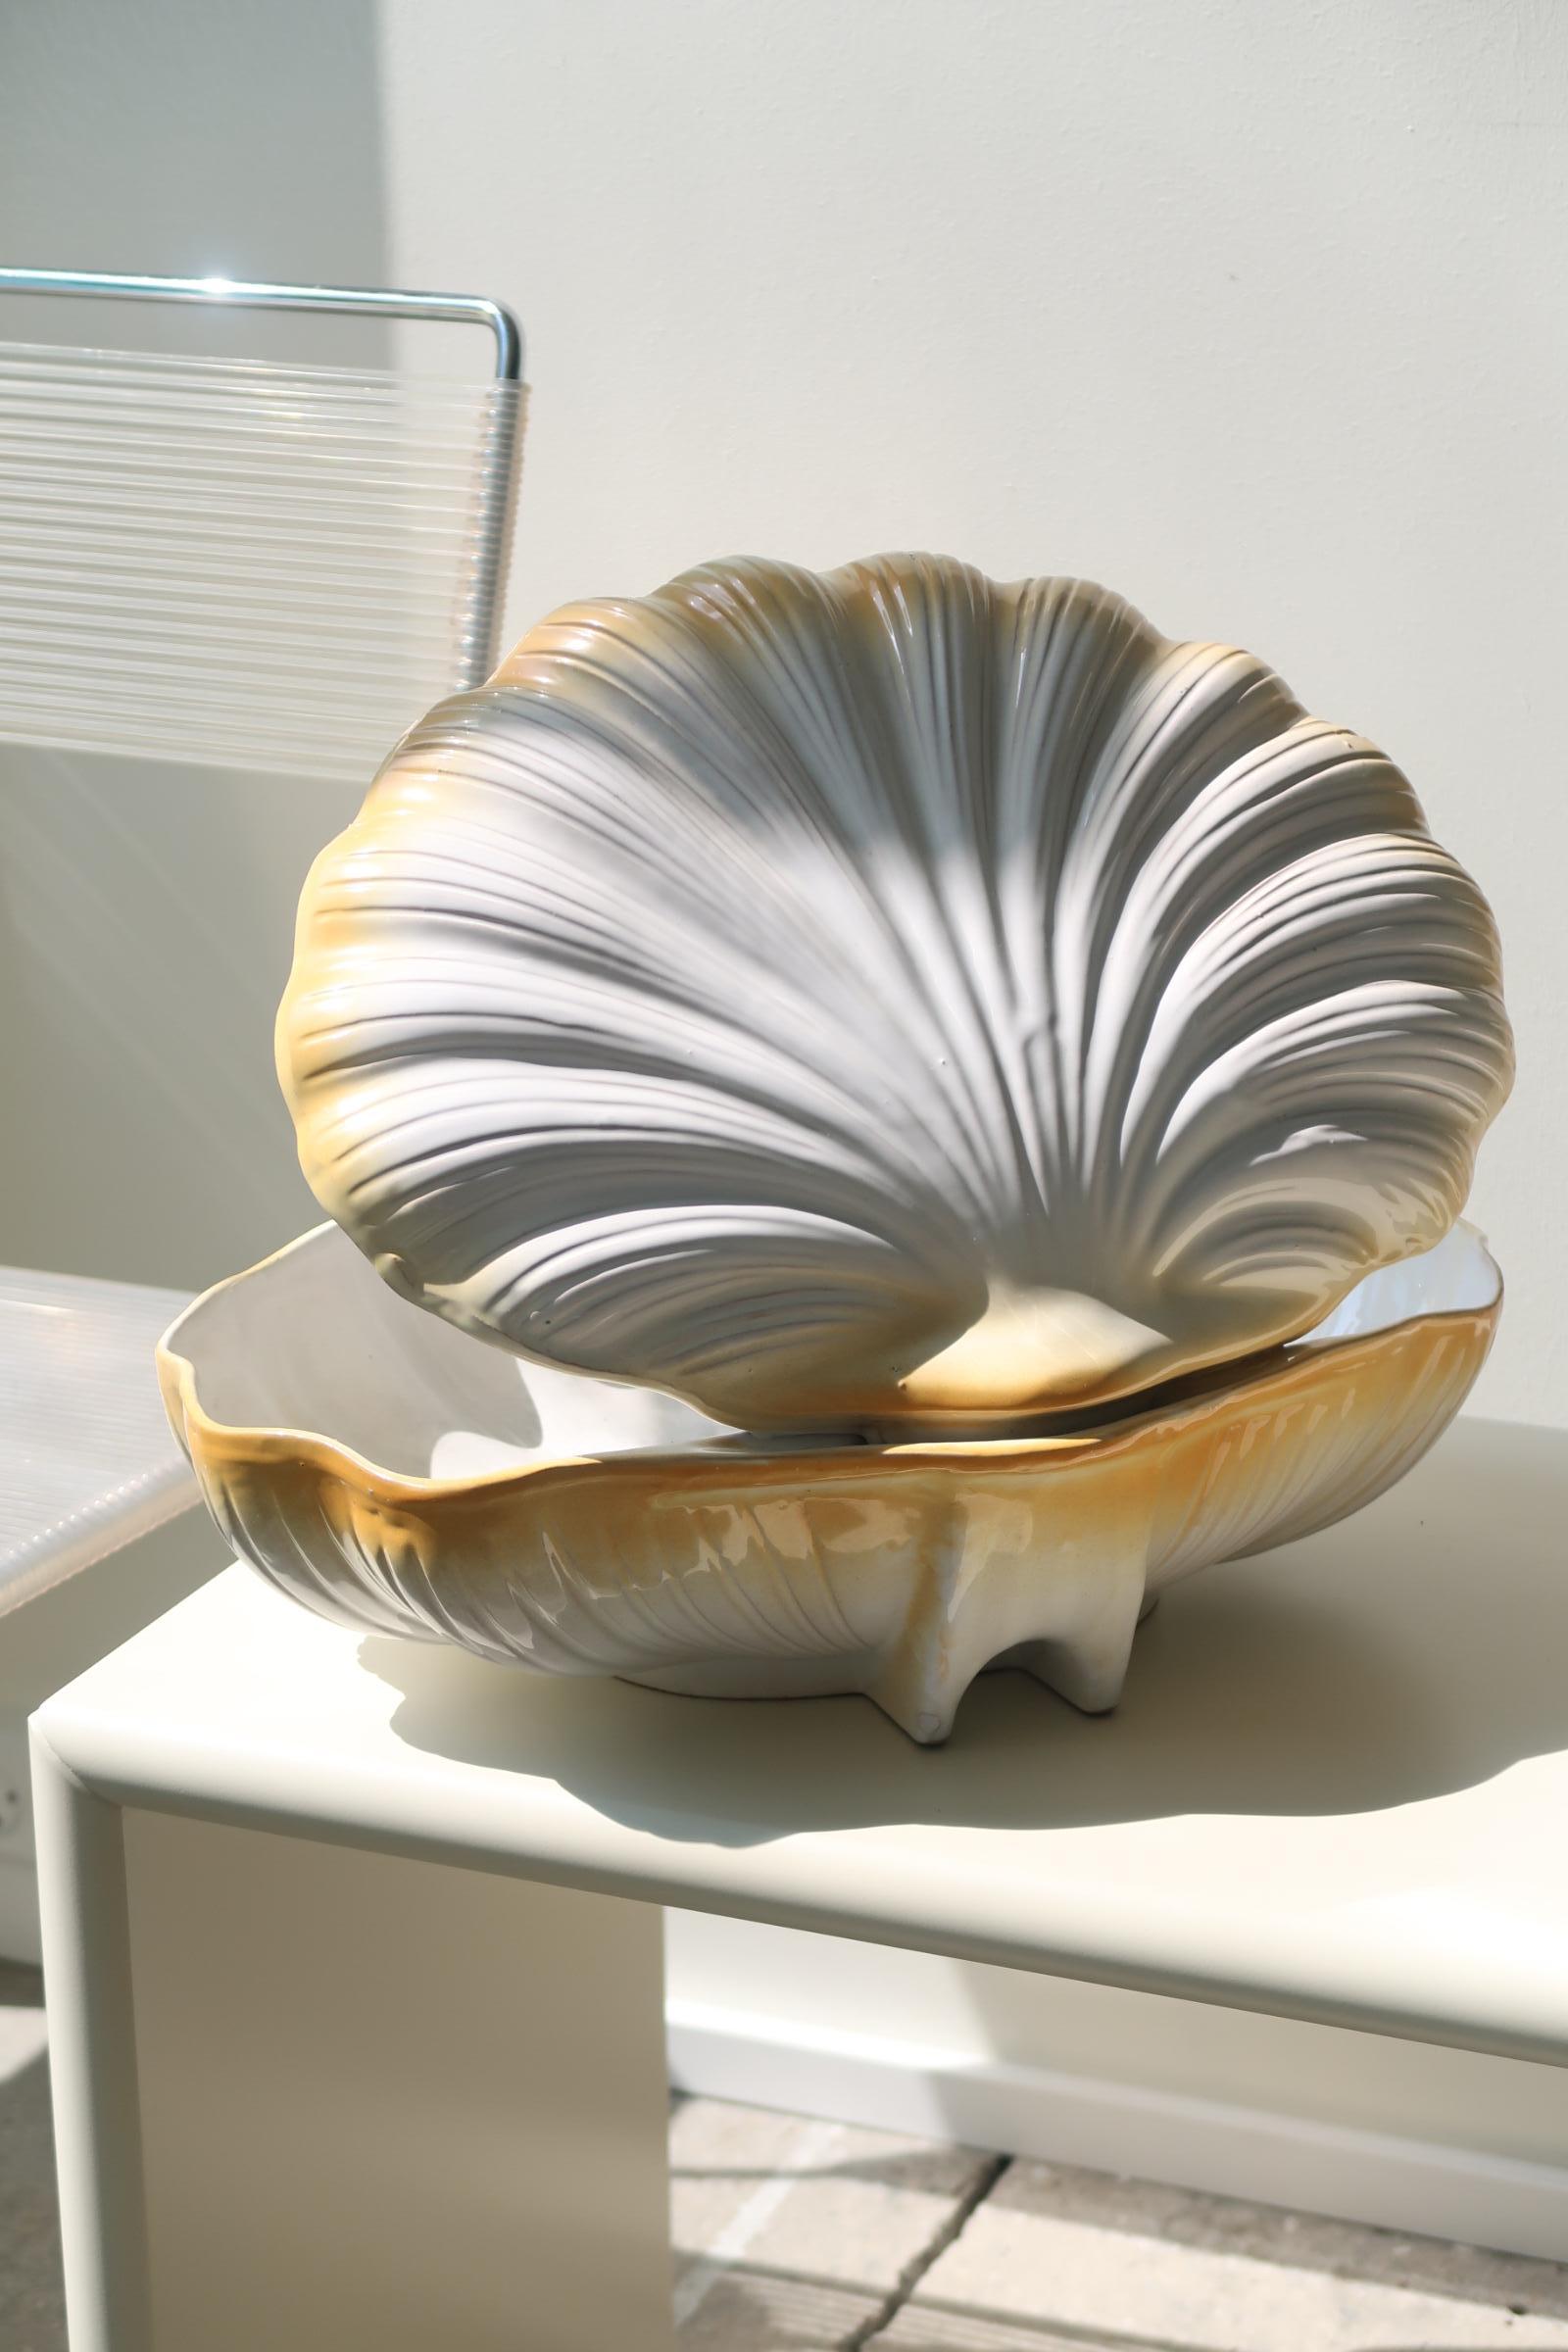 Vintage Italian clam sculpture / bowl in an extraordinary large size. Made of ceramic with a surface in white and yellow glaze. Has patina and small signs of use. Handmade in Italy, 1970s. Measures : L:41 cm H:32 cm D:31 cm.